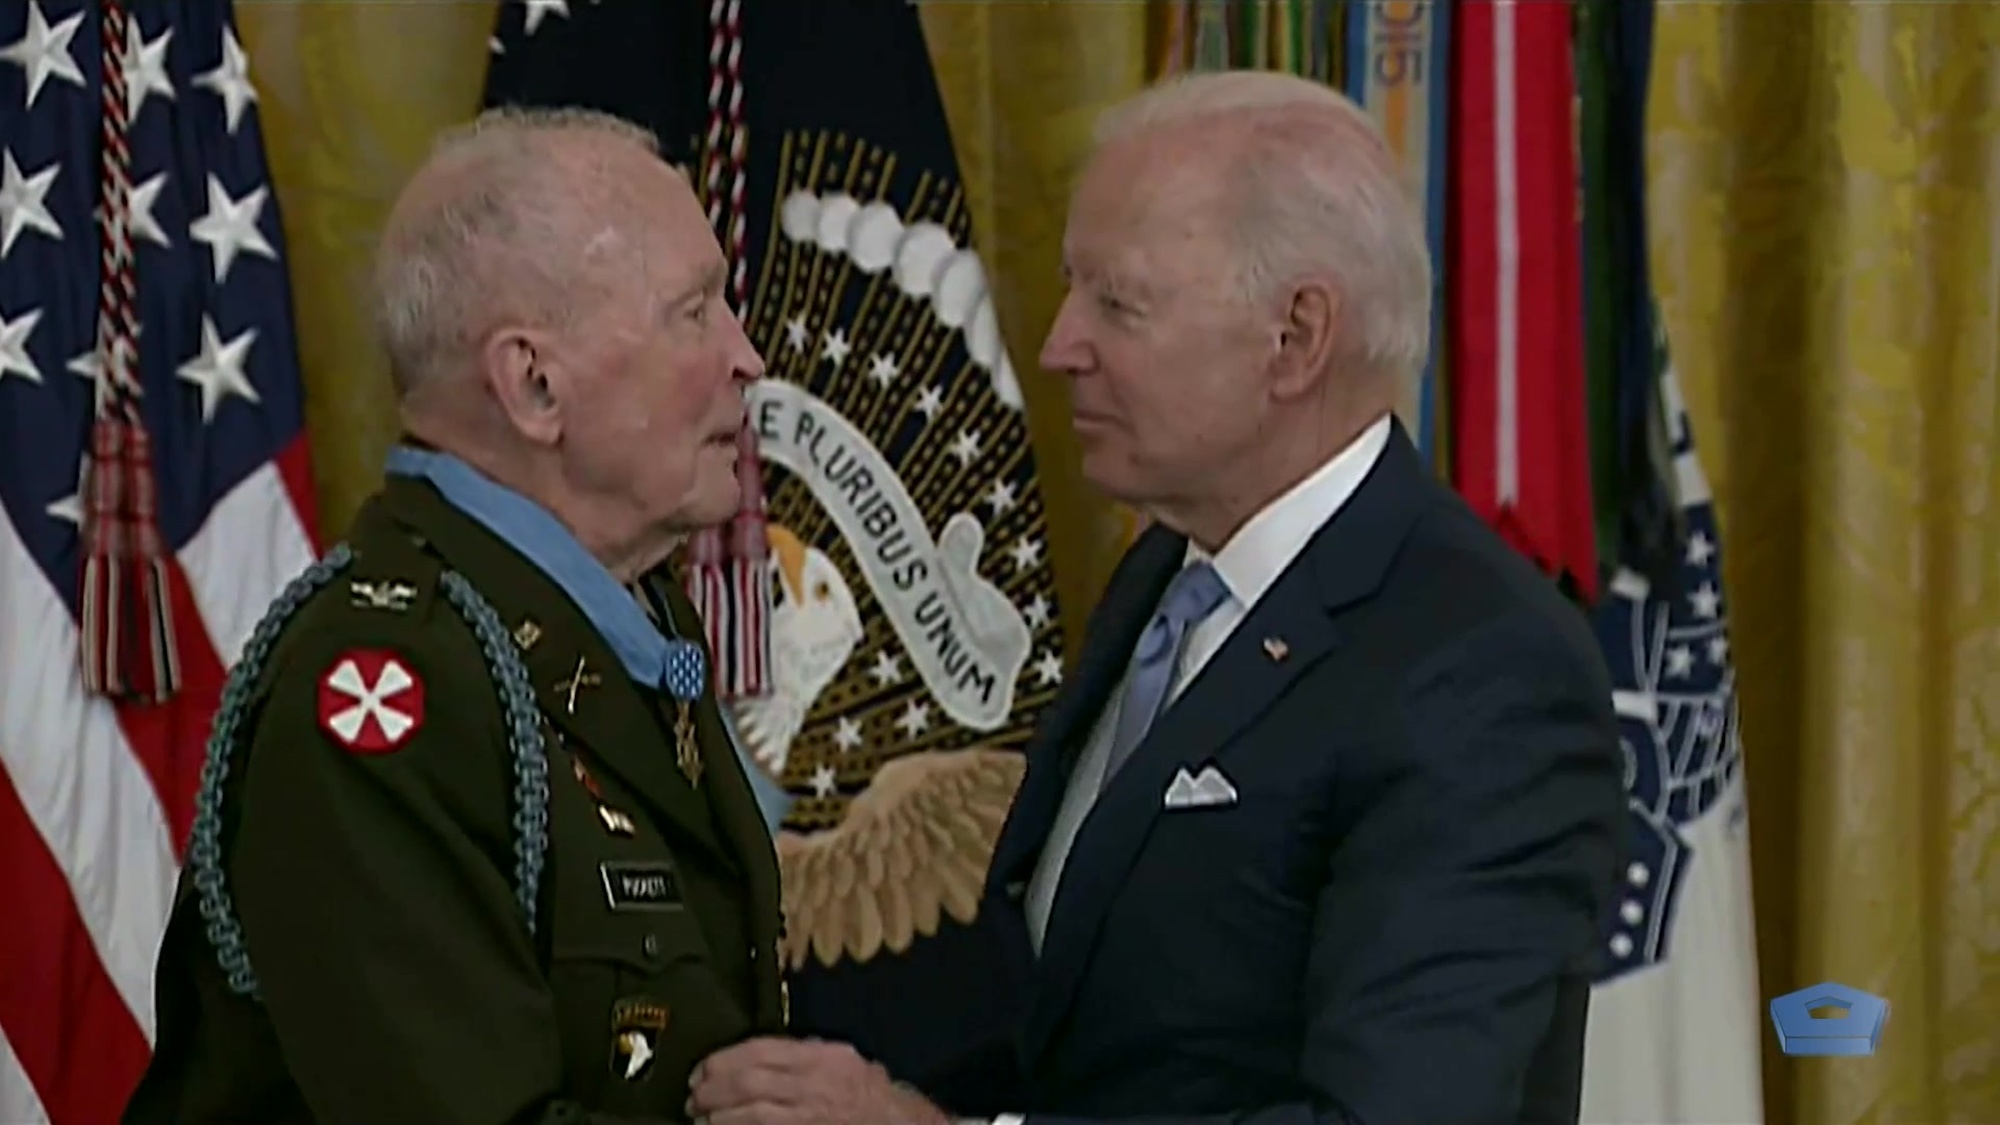 President Joe Biden presents the Medal of Honor to retired Army Col. Ralph Puckett Jr. for conspicuous gallantry during the Korean War, May 21, 2021. South Korean President Moon Jae-in is in attendance.